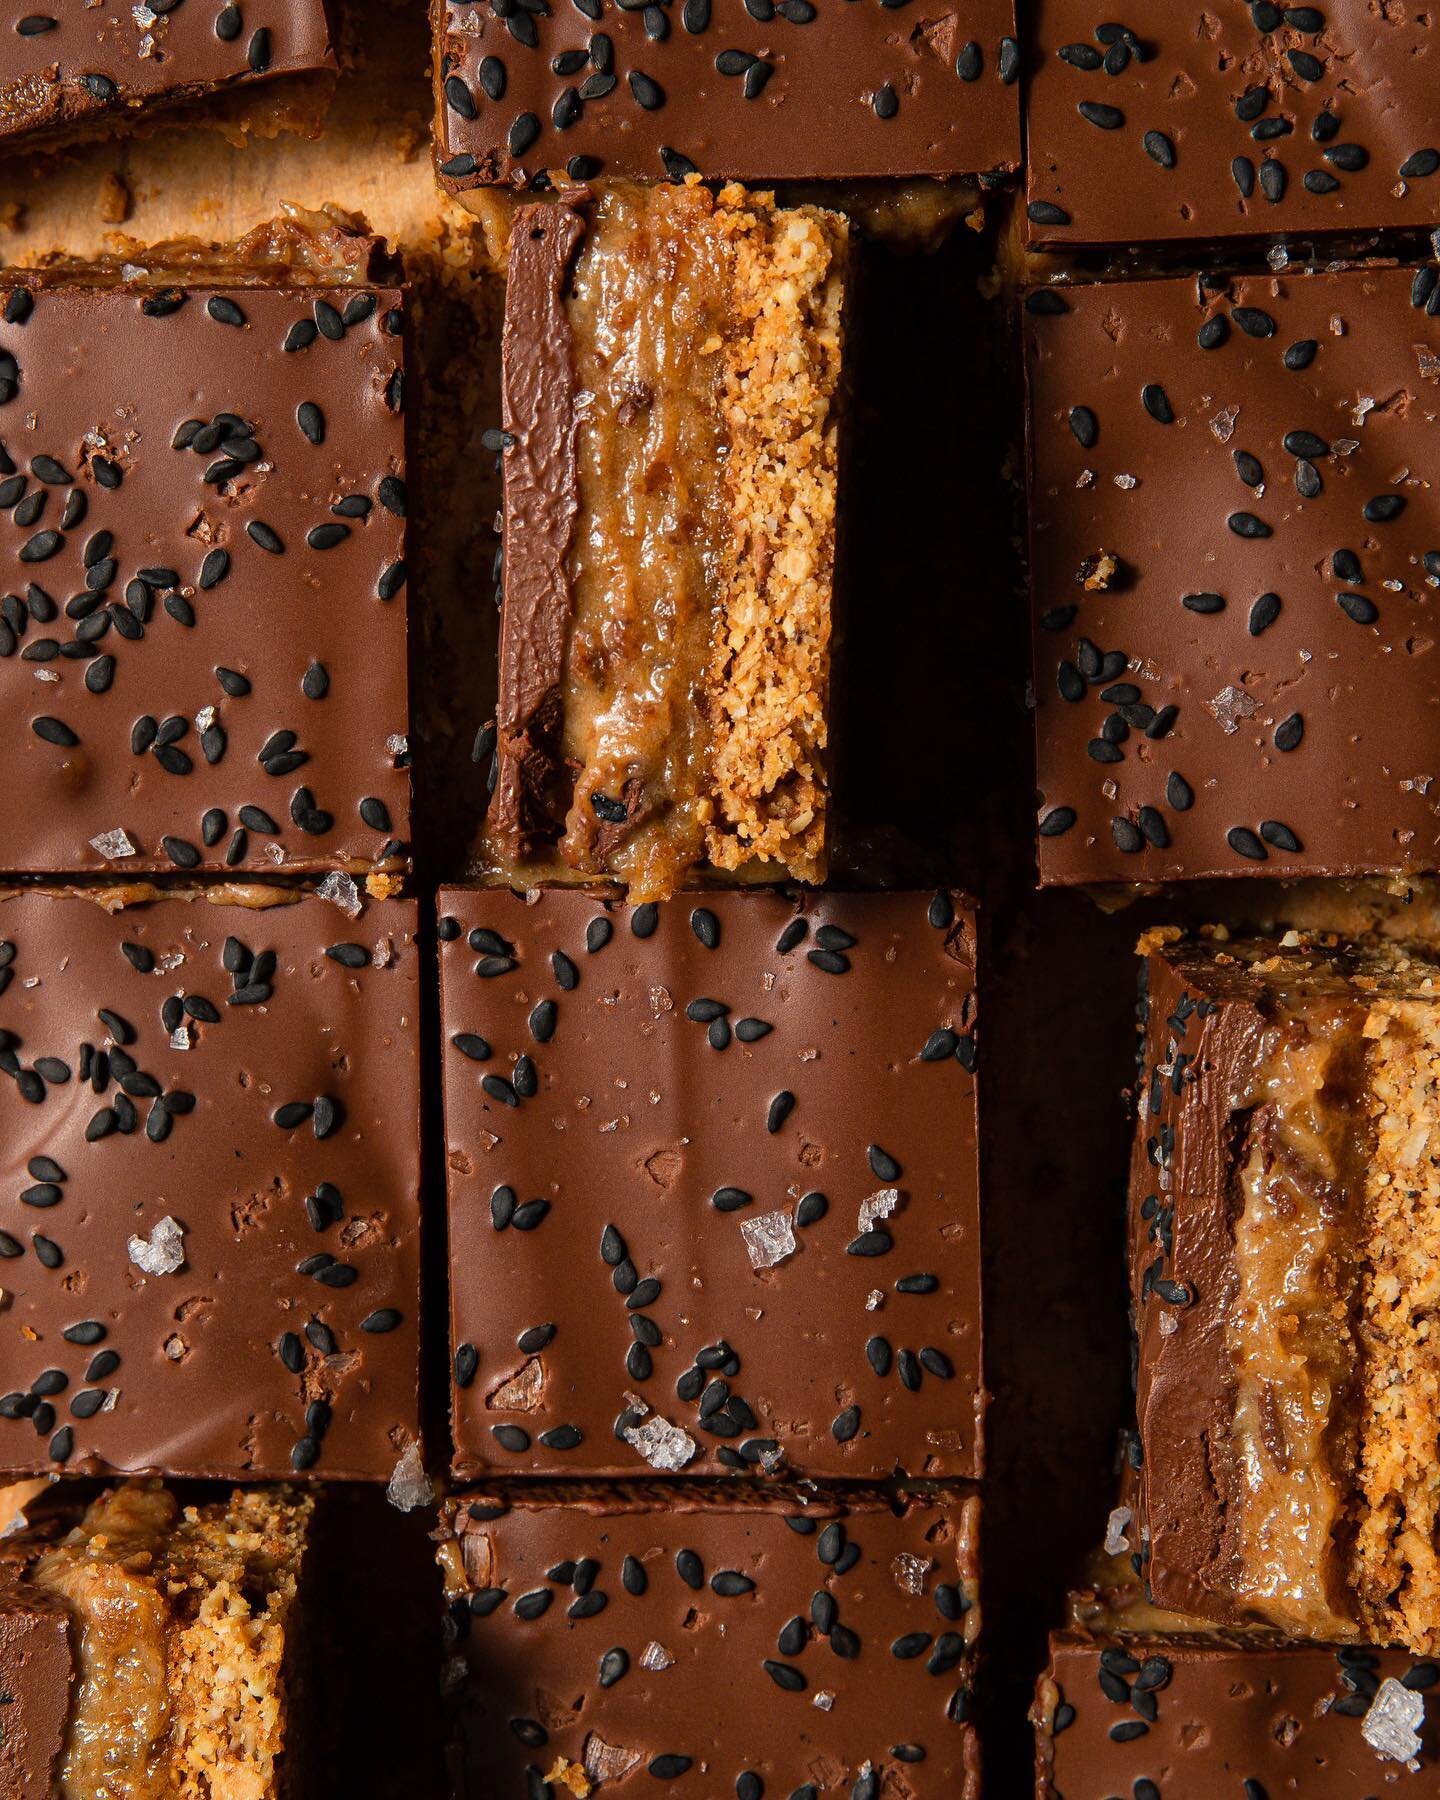 TAHINI CARAMEL BARS &thinsp;
&thinsp;
Gimme that fudge! Tahini is a main actor when it comes to hummus, but let&rsquo;s give it more stage time in the sweet section. Blended  with sweet dates, paired with a nutty crust and a smooth chocolate coat, al